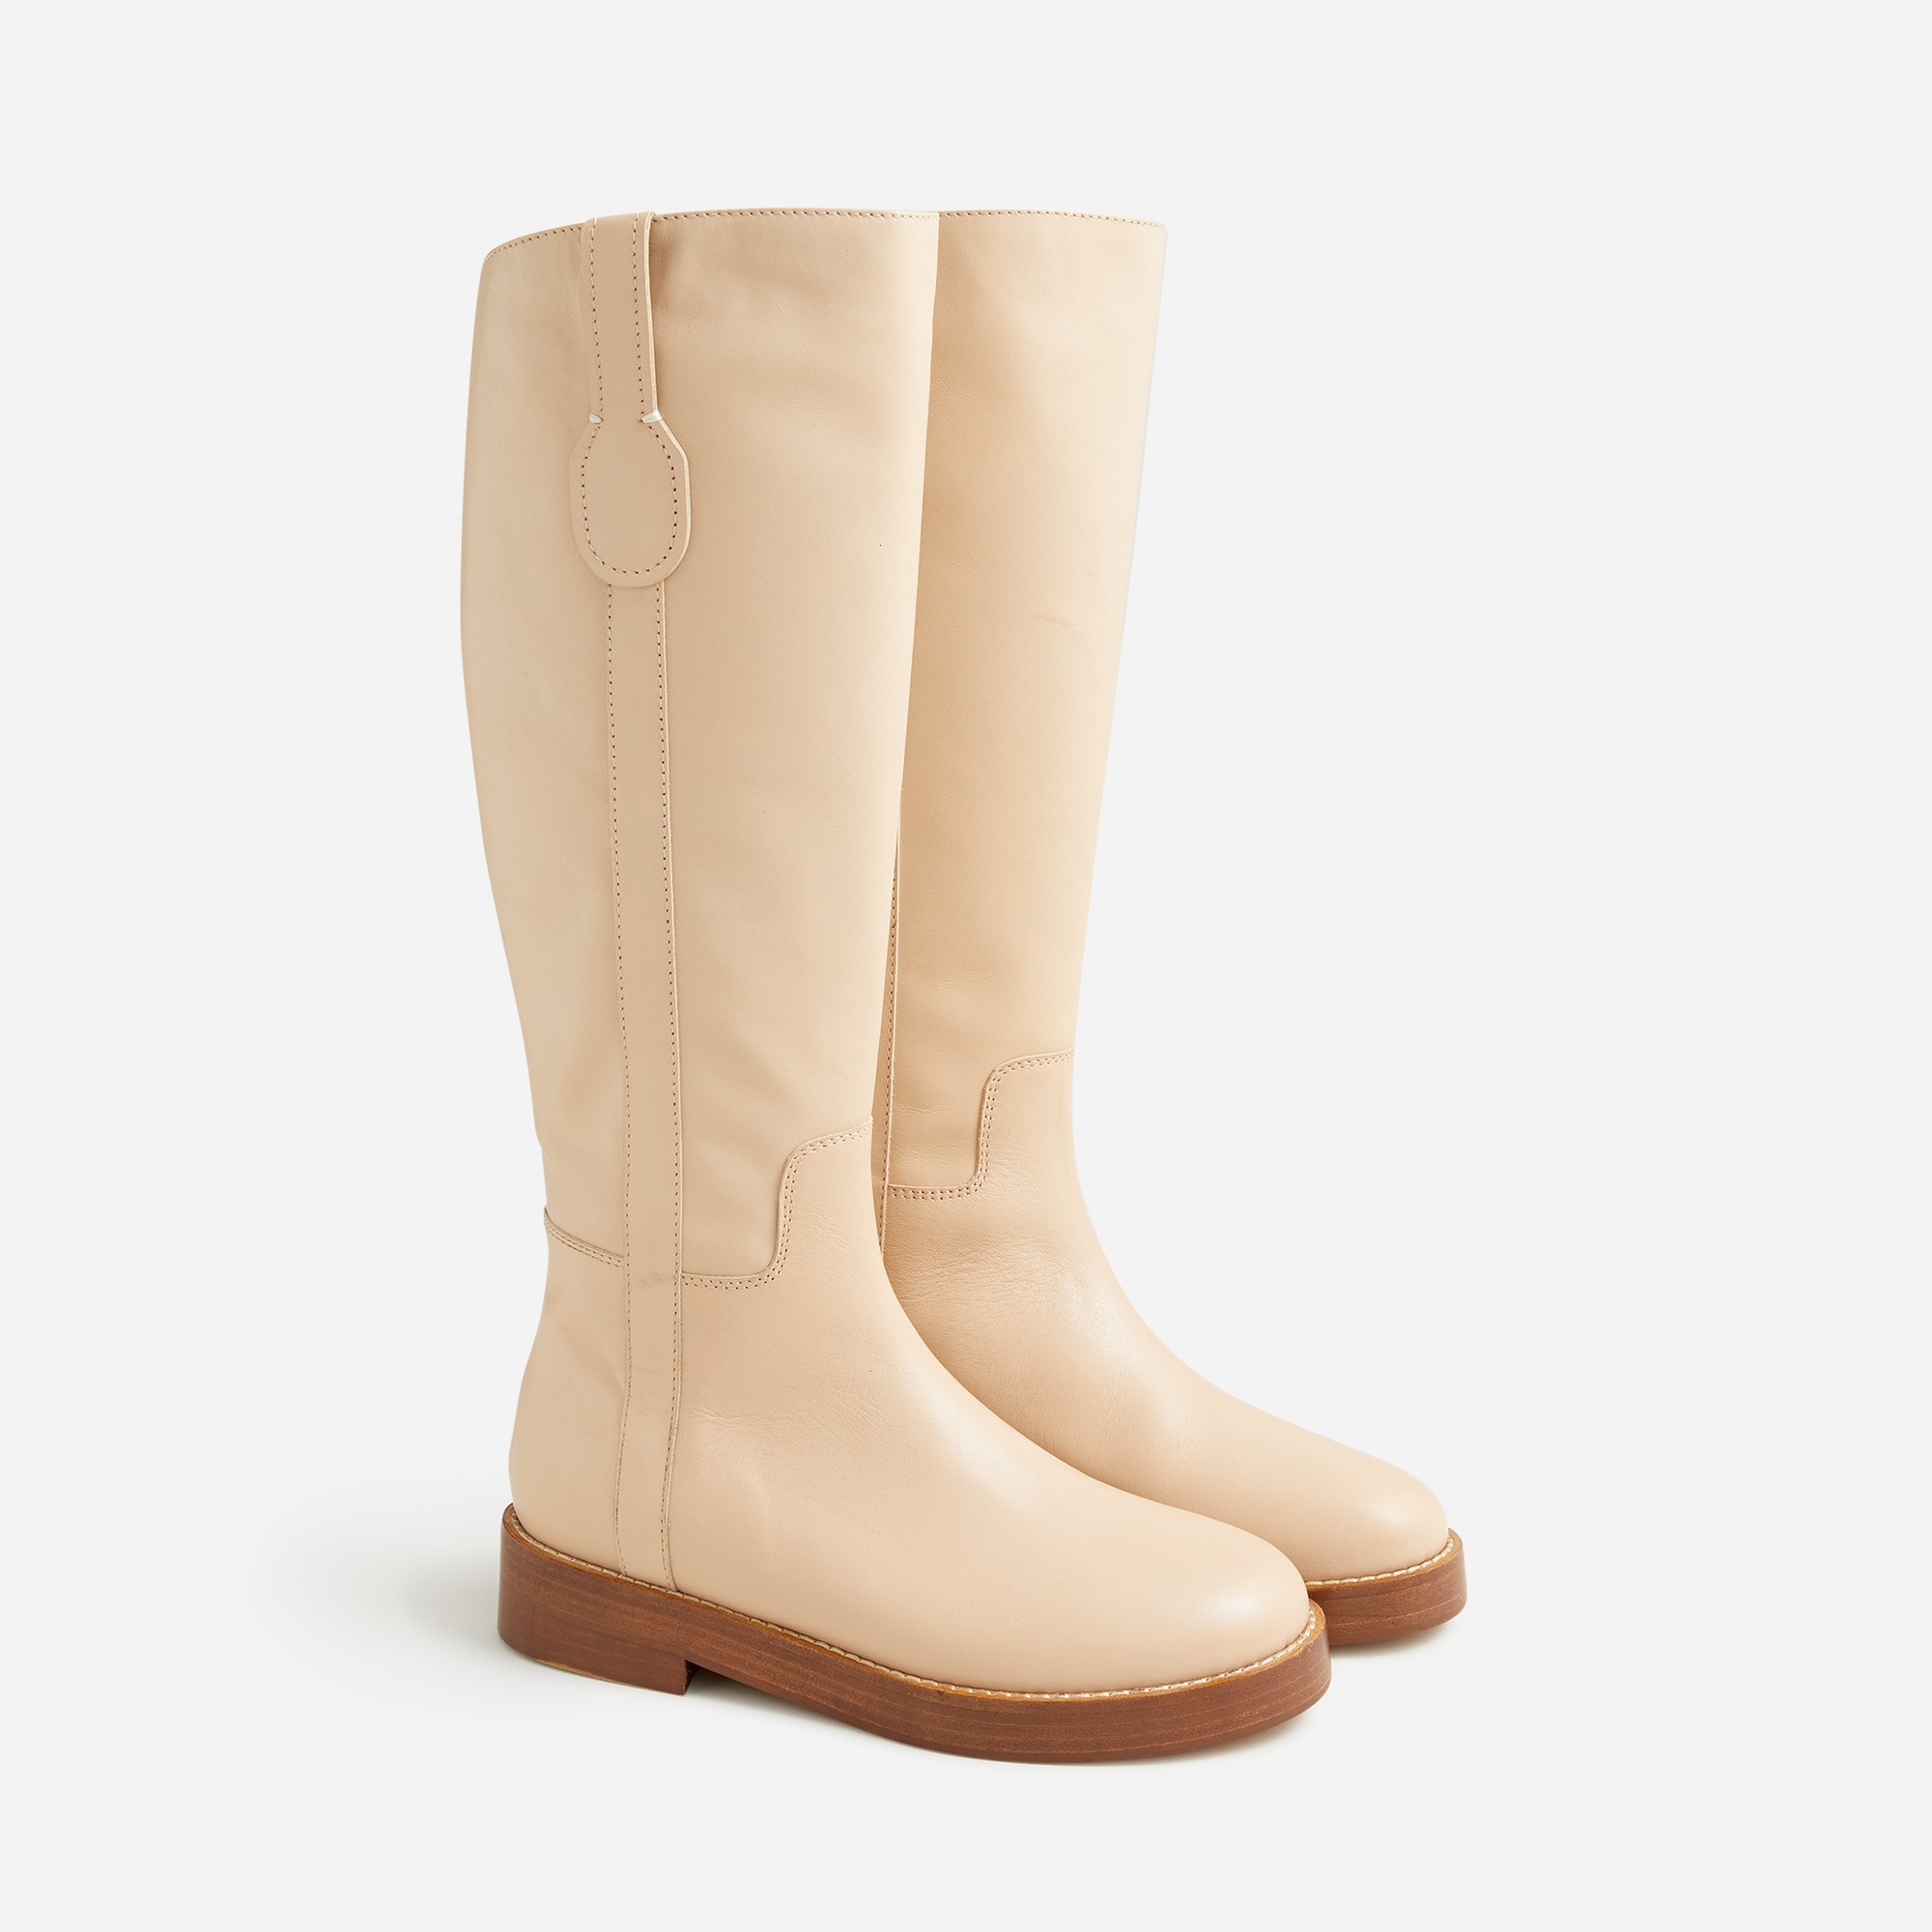 J.Crew: Berkeley Riding Boots In Leather For Women